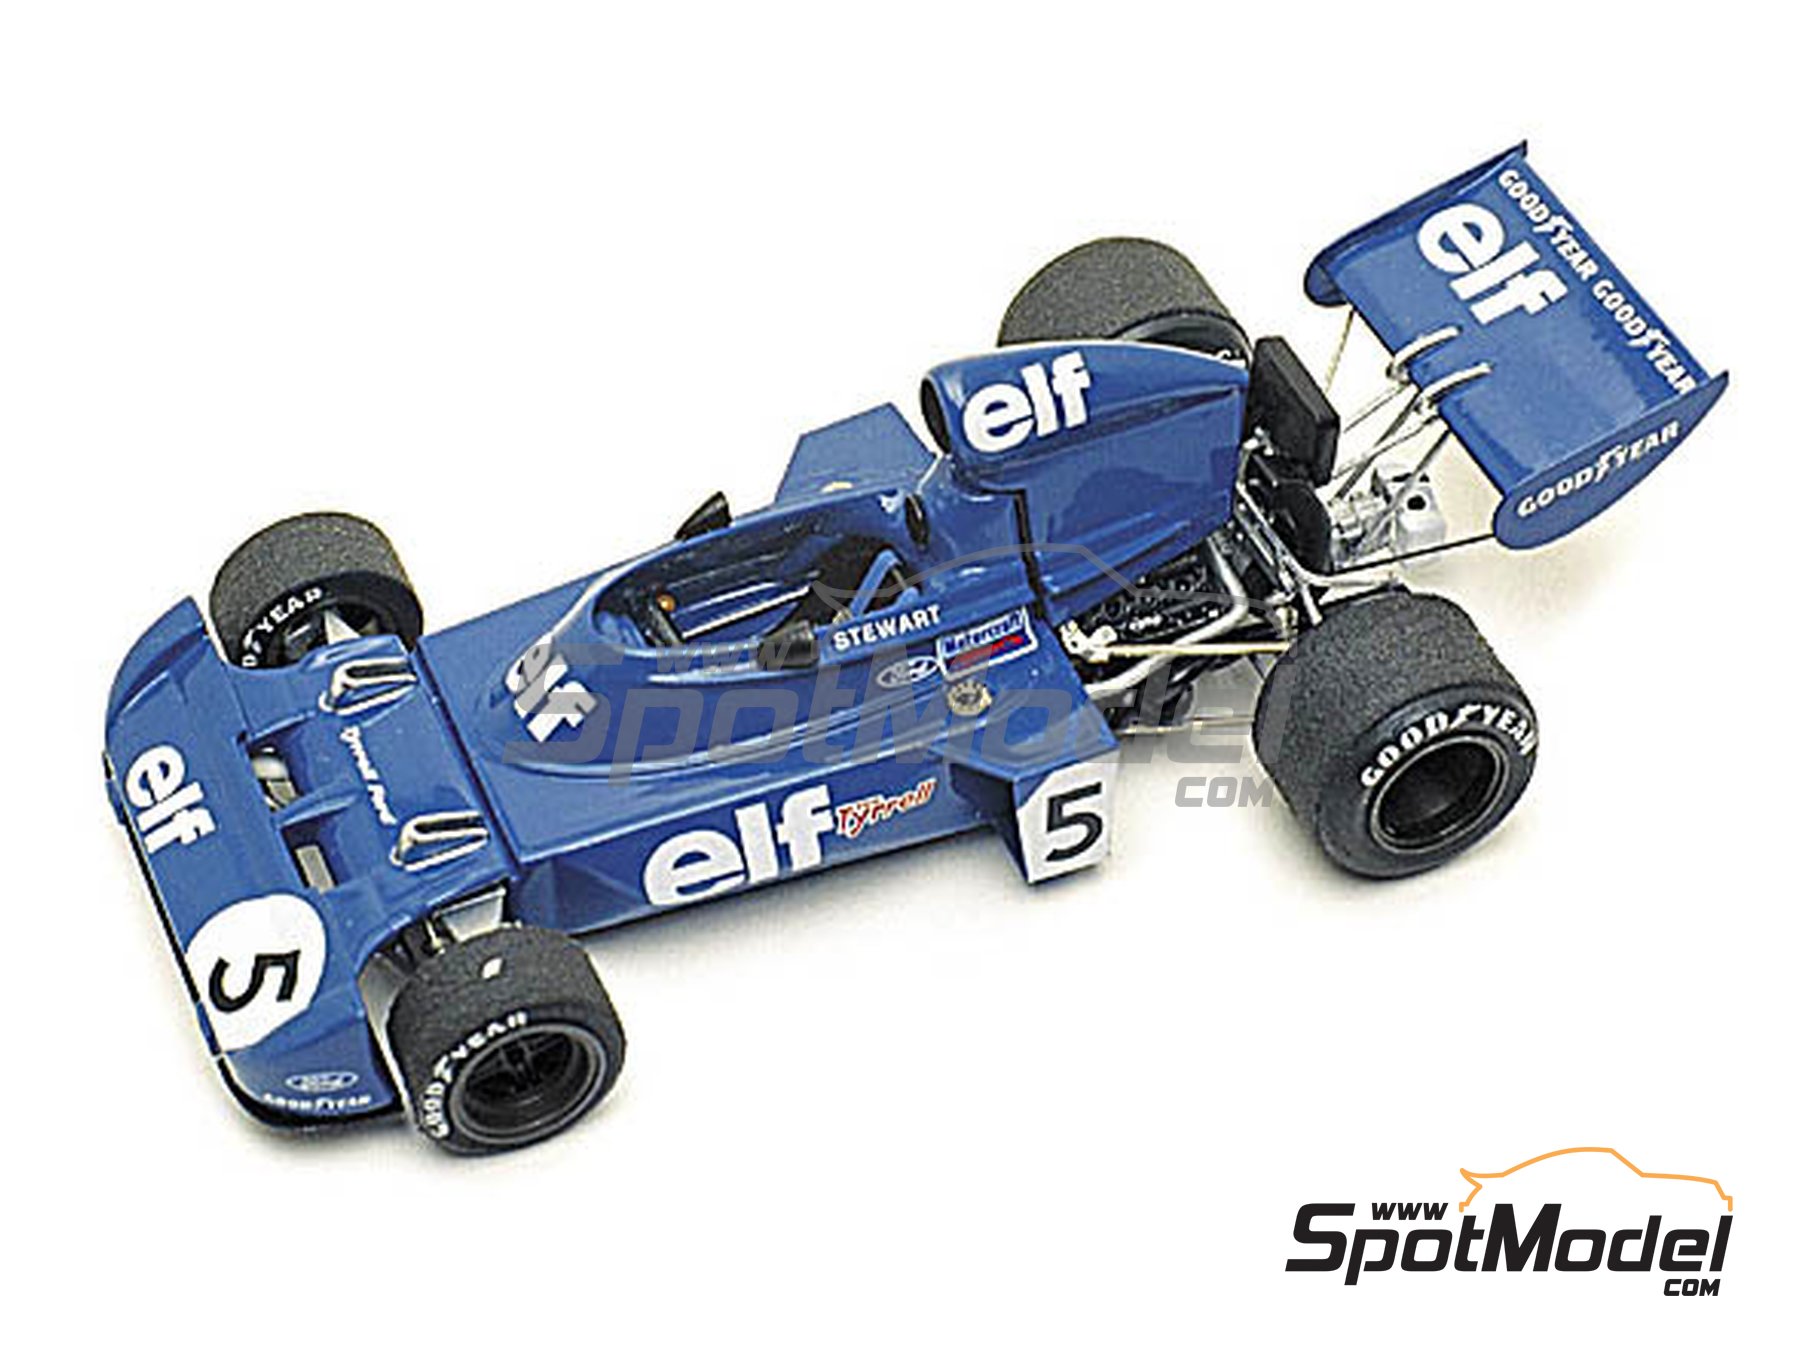 Tyrrell Ford 006 Tyrrell Racing Team sponsored by ELF - Italian Formula 1  Grand Prix 1973. Car scale model kit in 1/43 scale manufactured by Tameo Kit